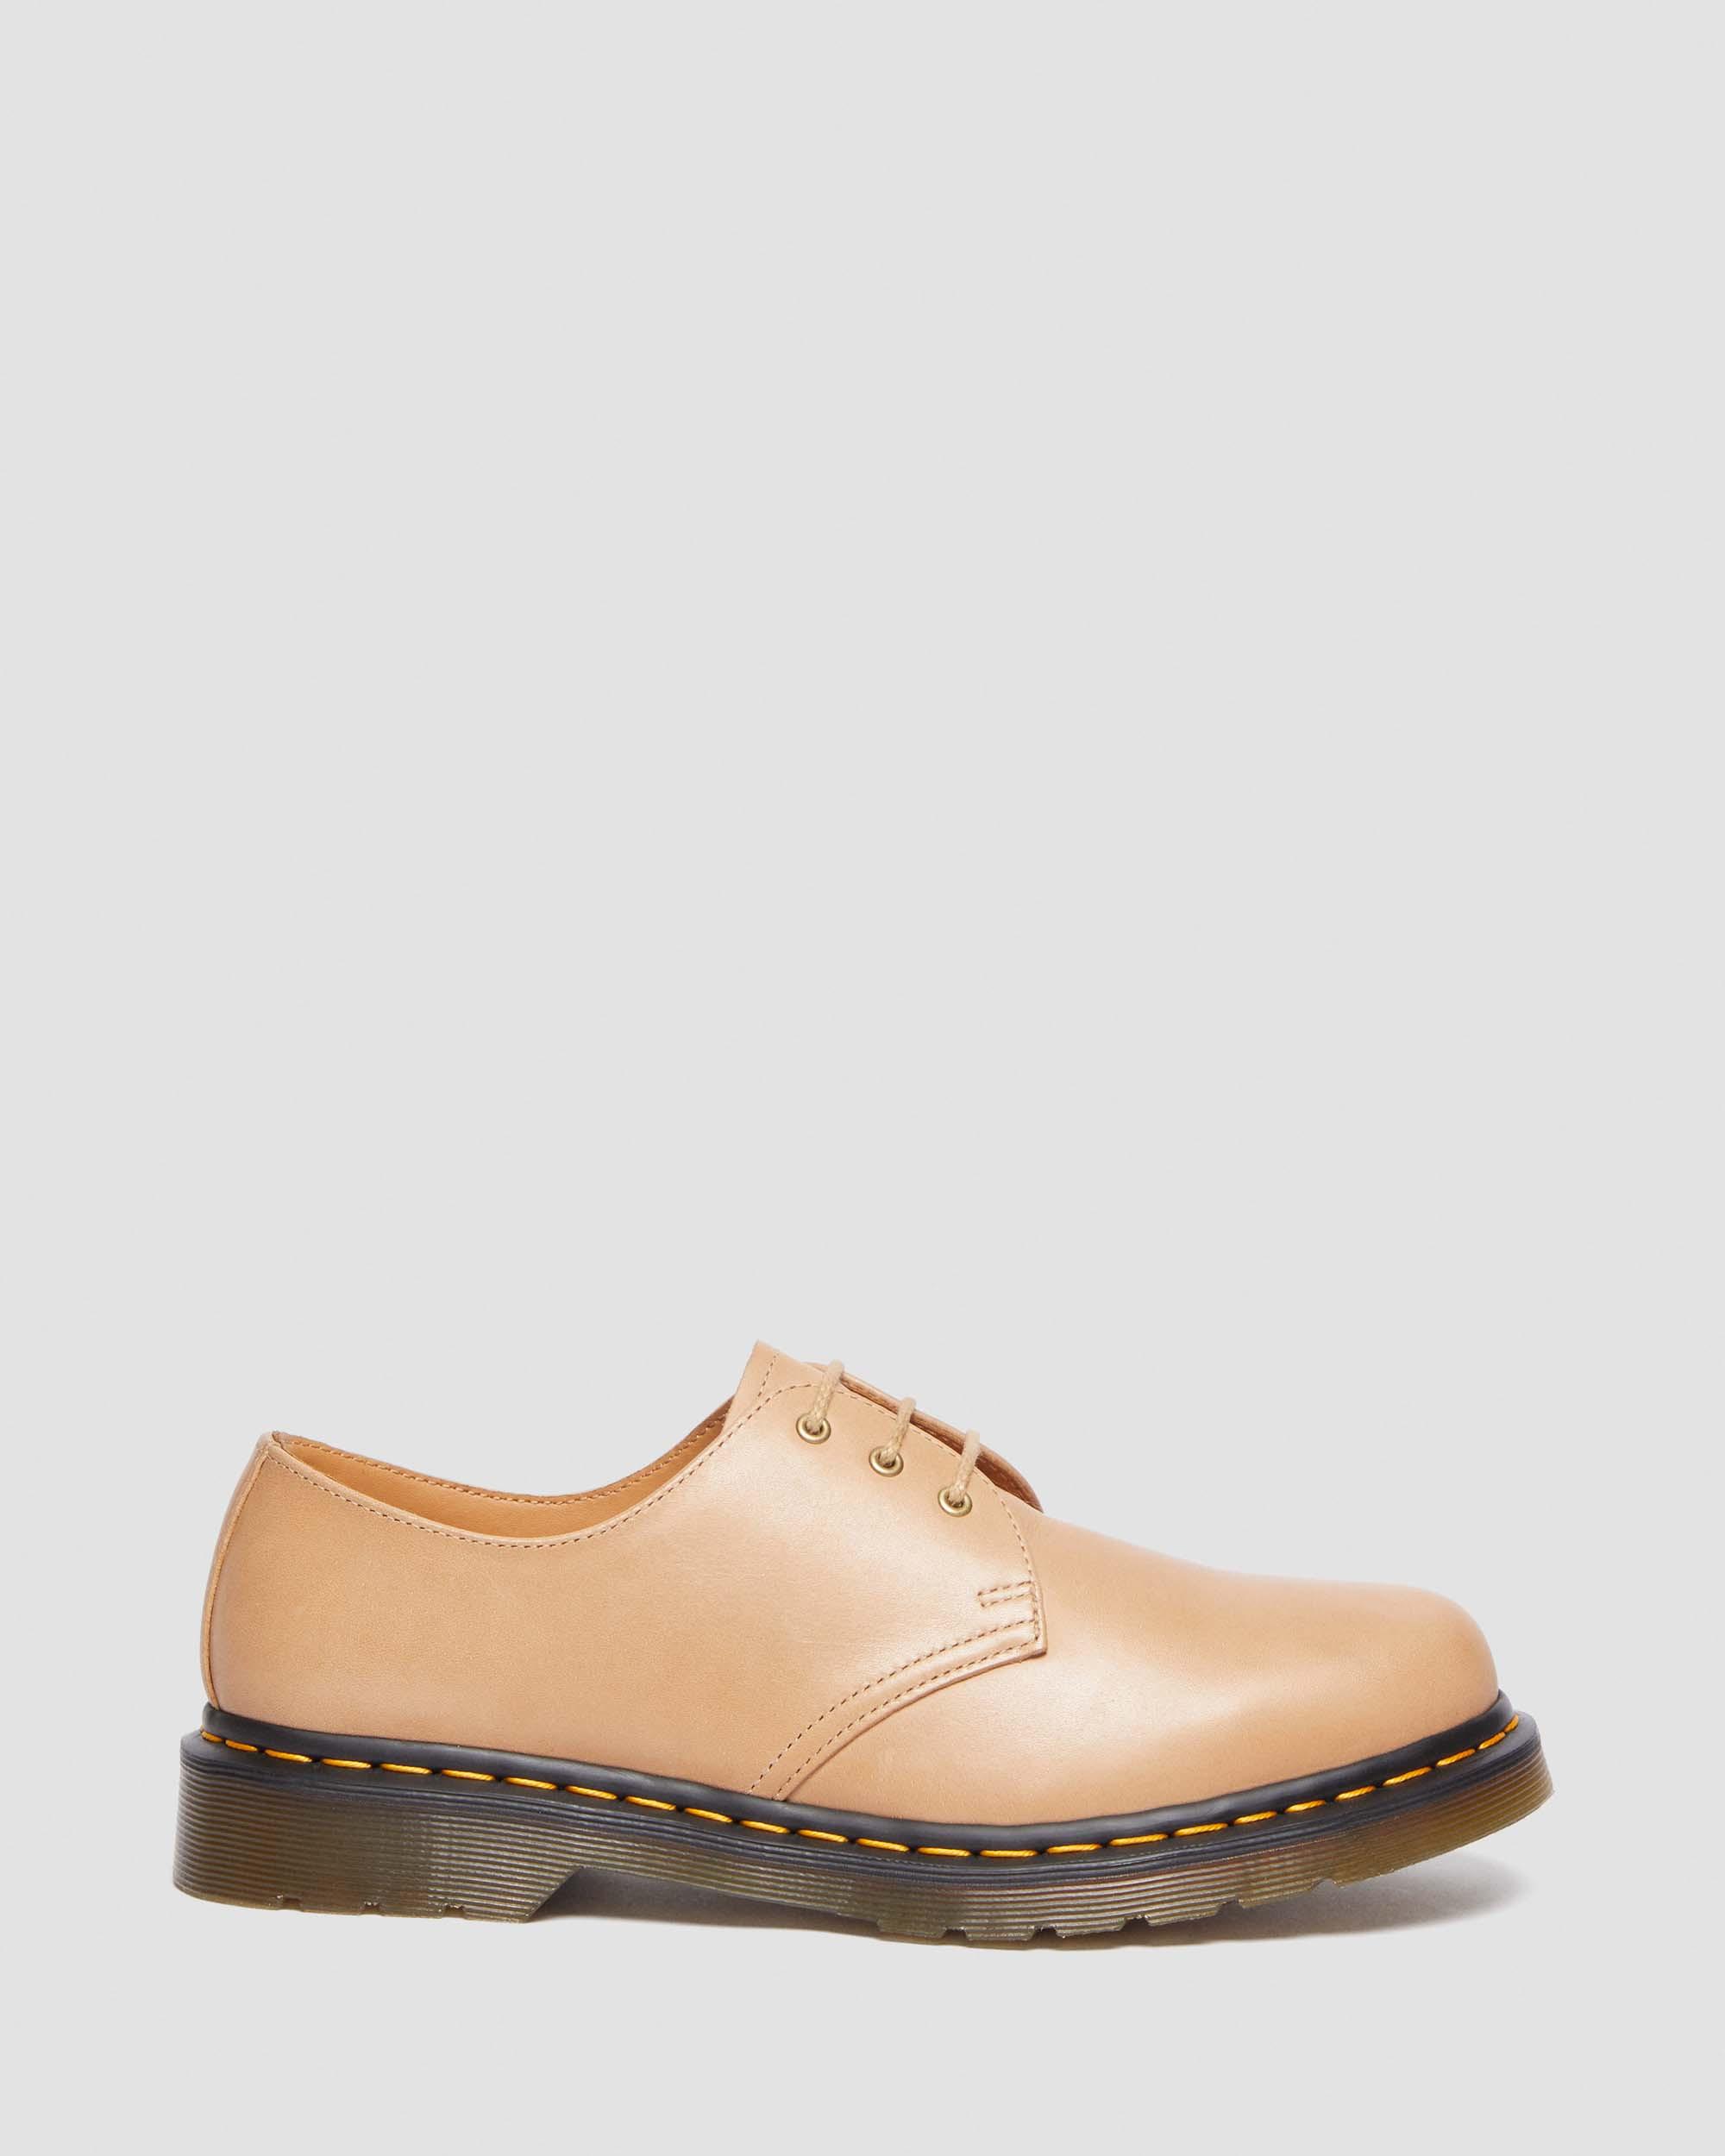 1461 Carrara Leather Oxford Shoes in Beige